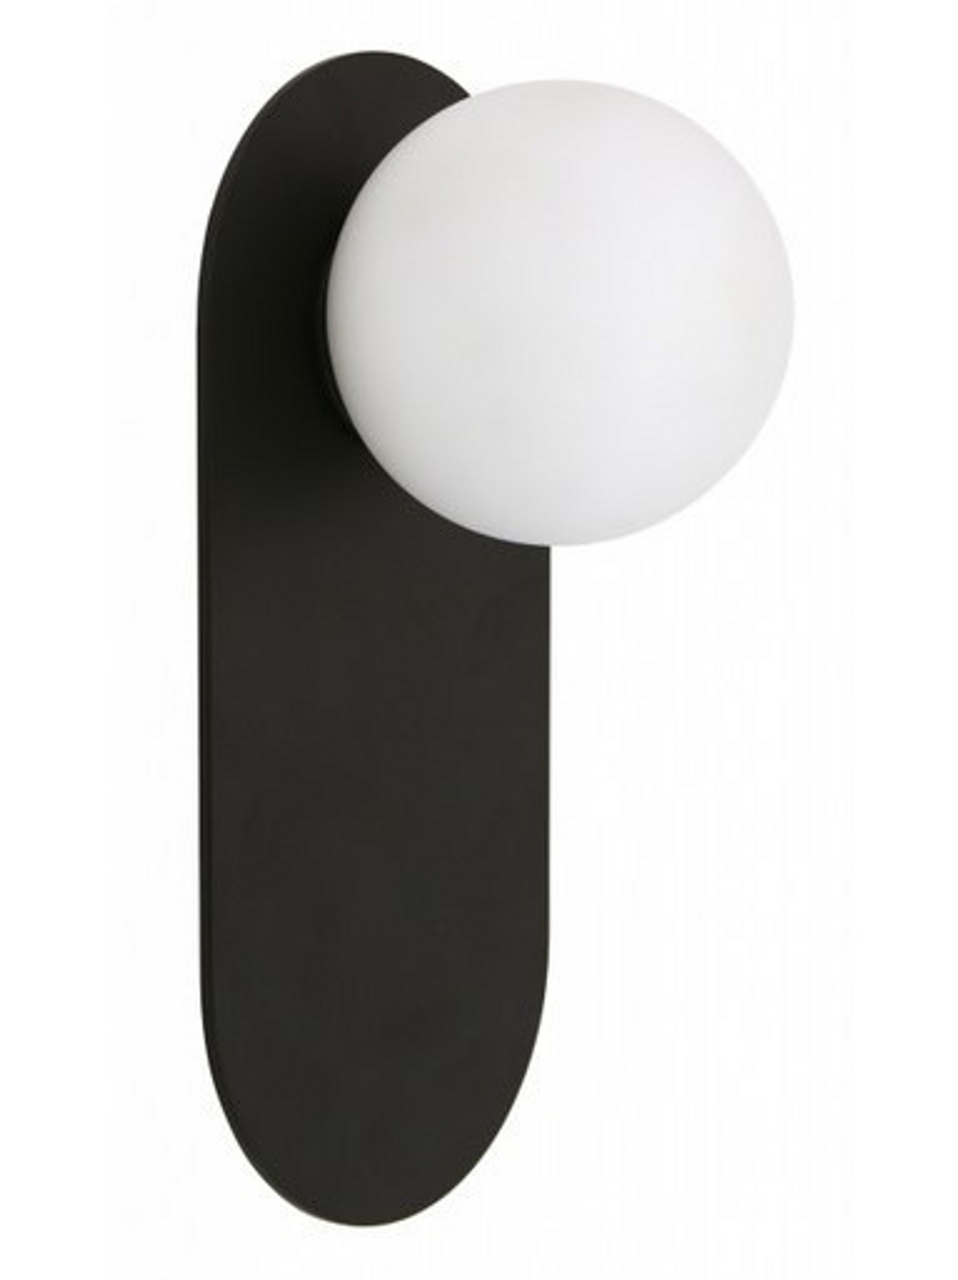 Black wall light with opal glass